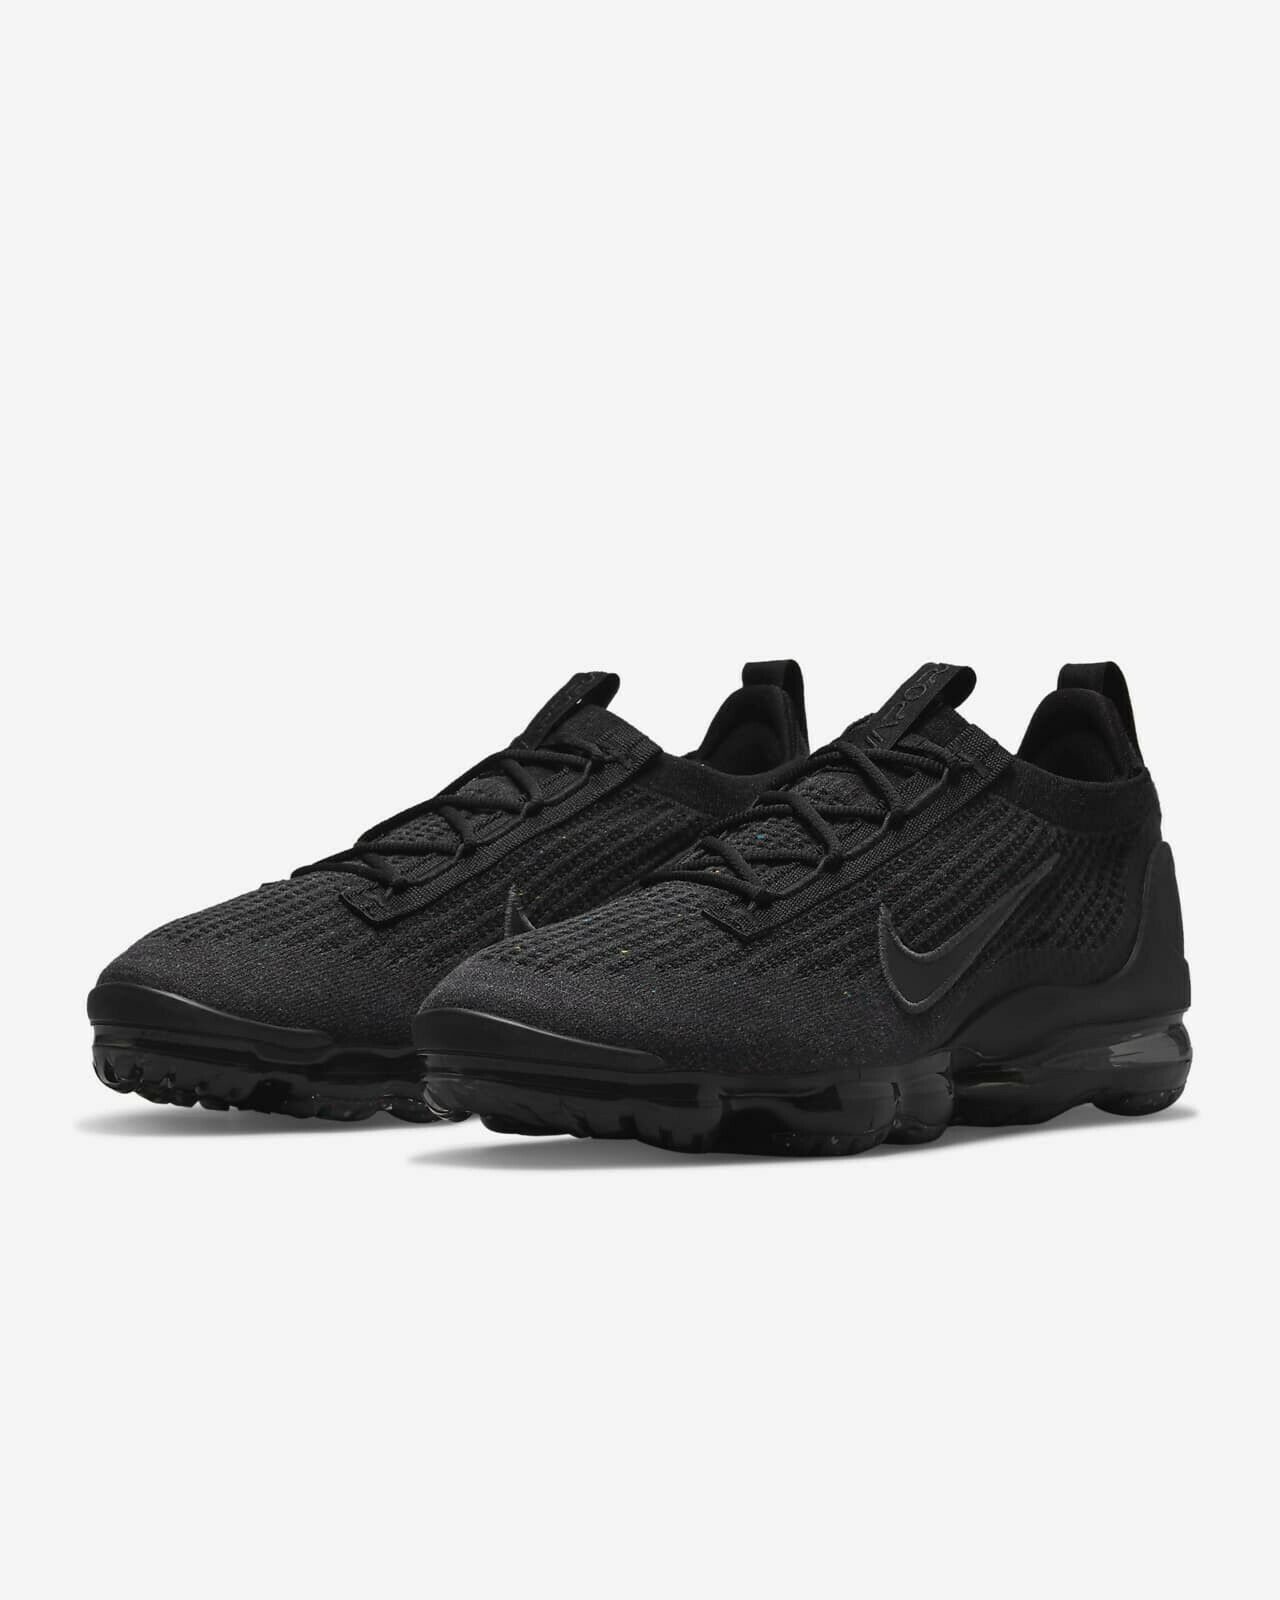 Nike Air Vapormax 2021 Flyknit Black/Anthracite Shoes Men's 10 DH4084 001